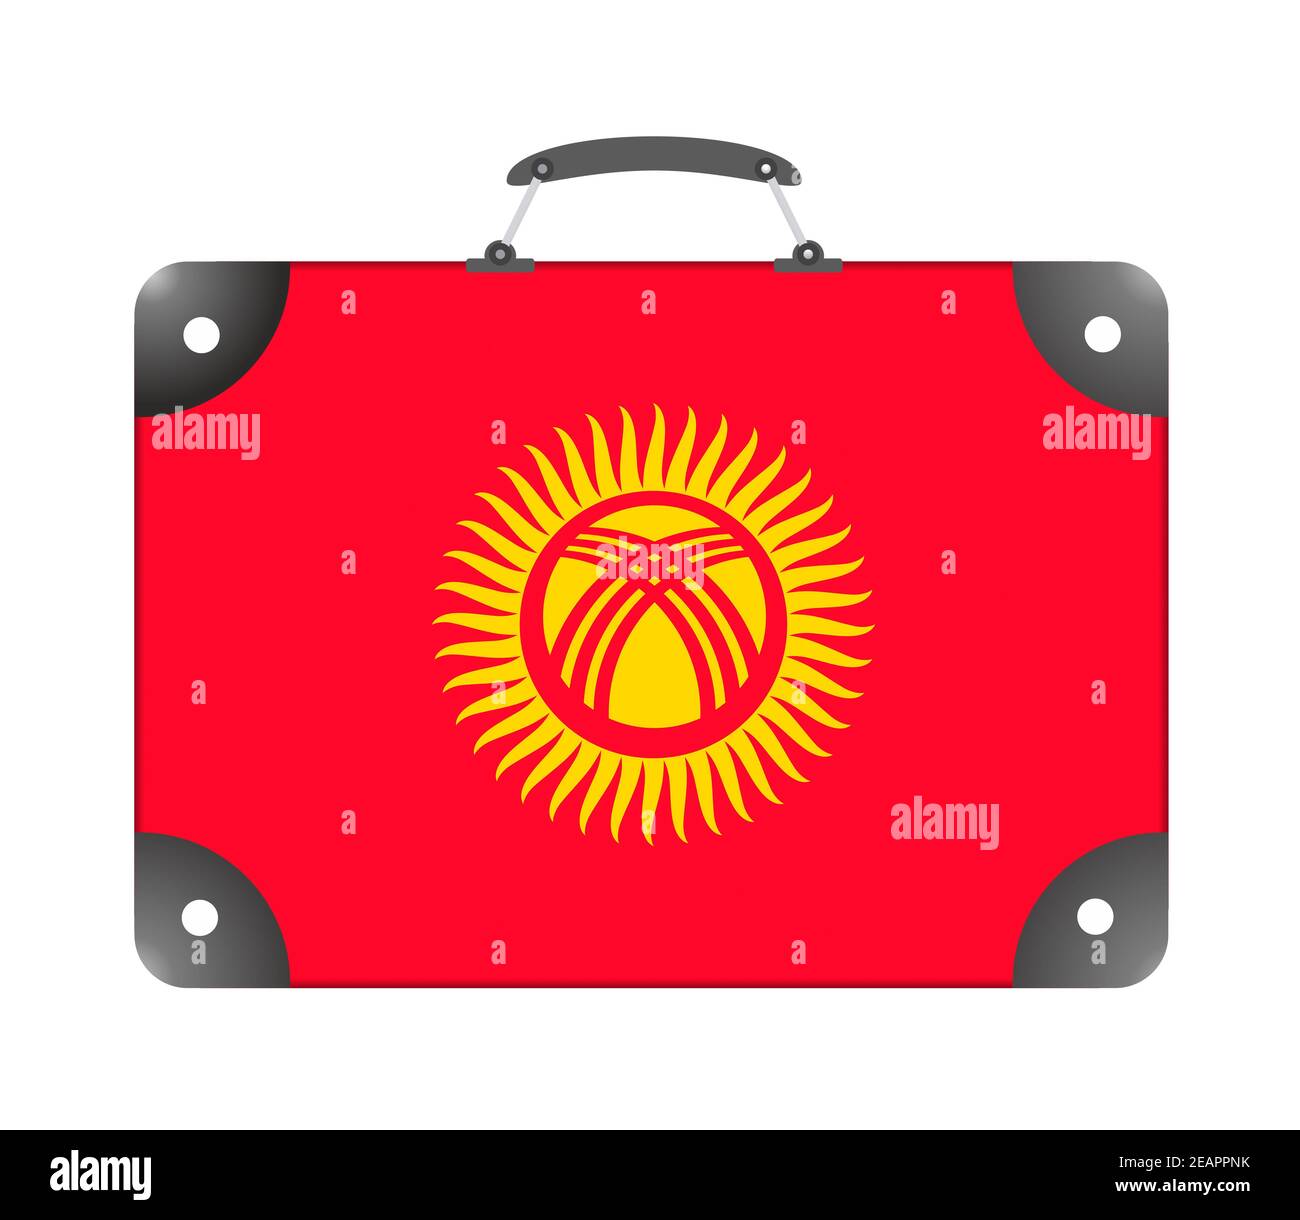 Flag of the country of Kyrgyzstan in the form of a travel suitcase on a white background Stock Photo